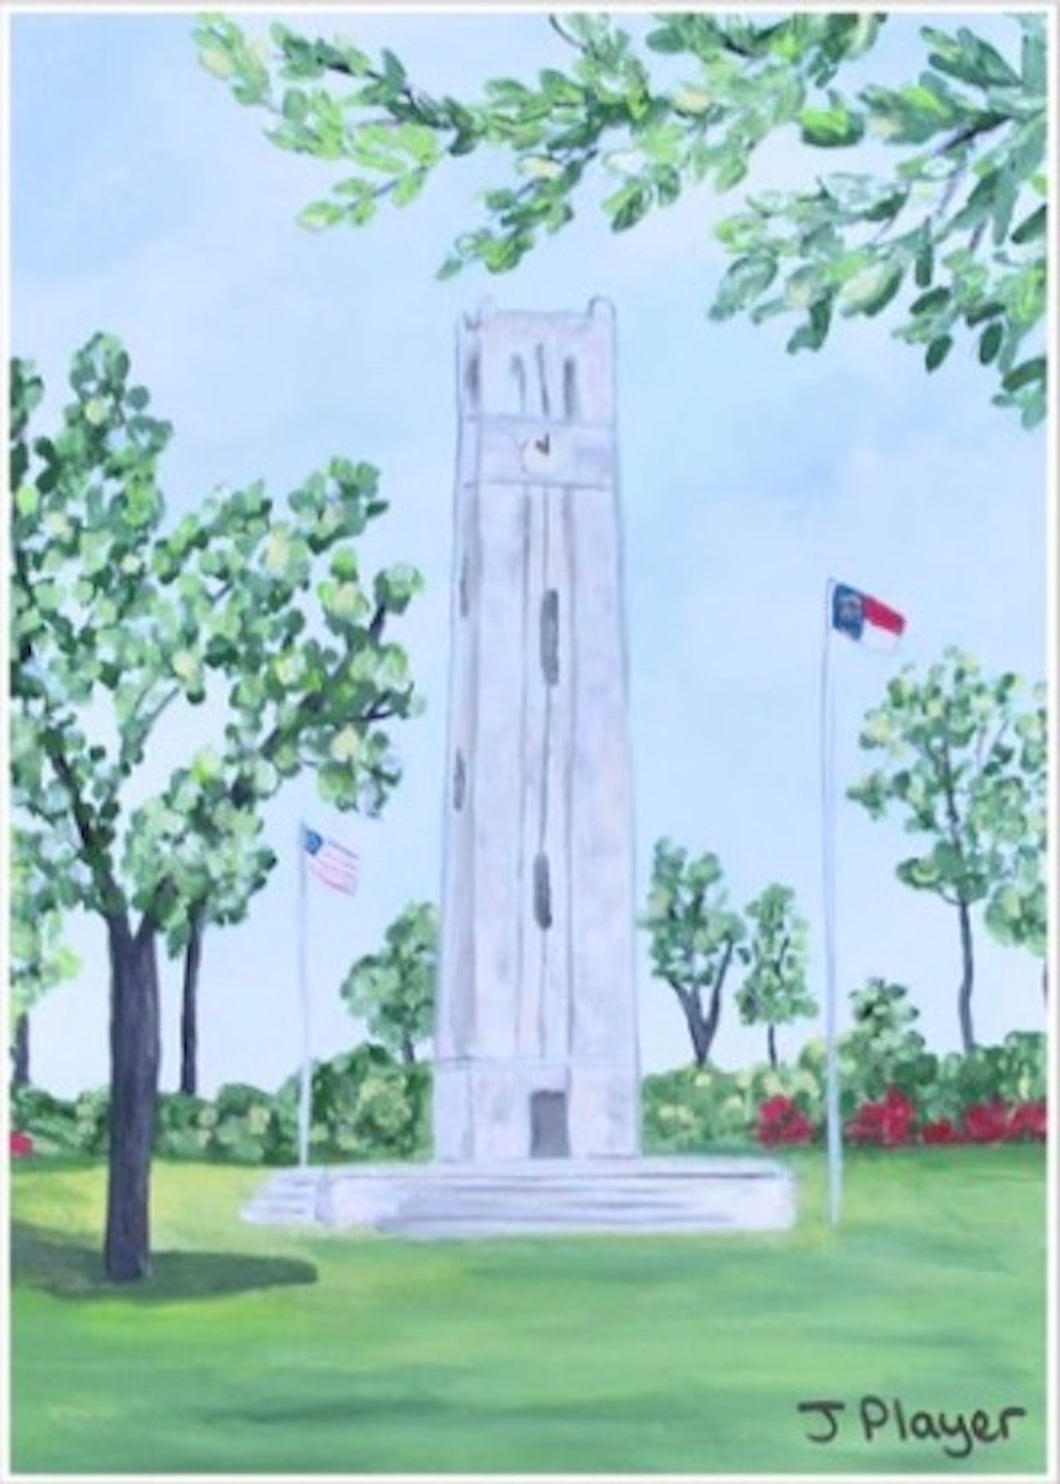 NC State Bell Tower Art on a Free Standing Acrylic Block. This is a vertical landscape artwork of NCSU Memorial Belltower reproduced on an acrylic block. The belltower is in grassy field with blooming trees and shubbery. It is a small 5 x 7 inch block perfect to give for NC State graduation gift or alumni gift. Wolfpack art gift.